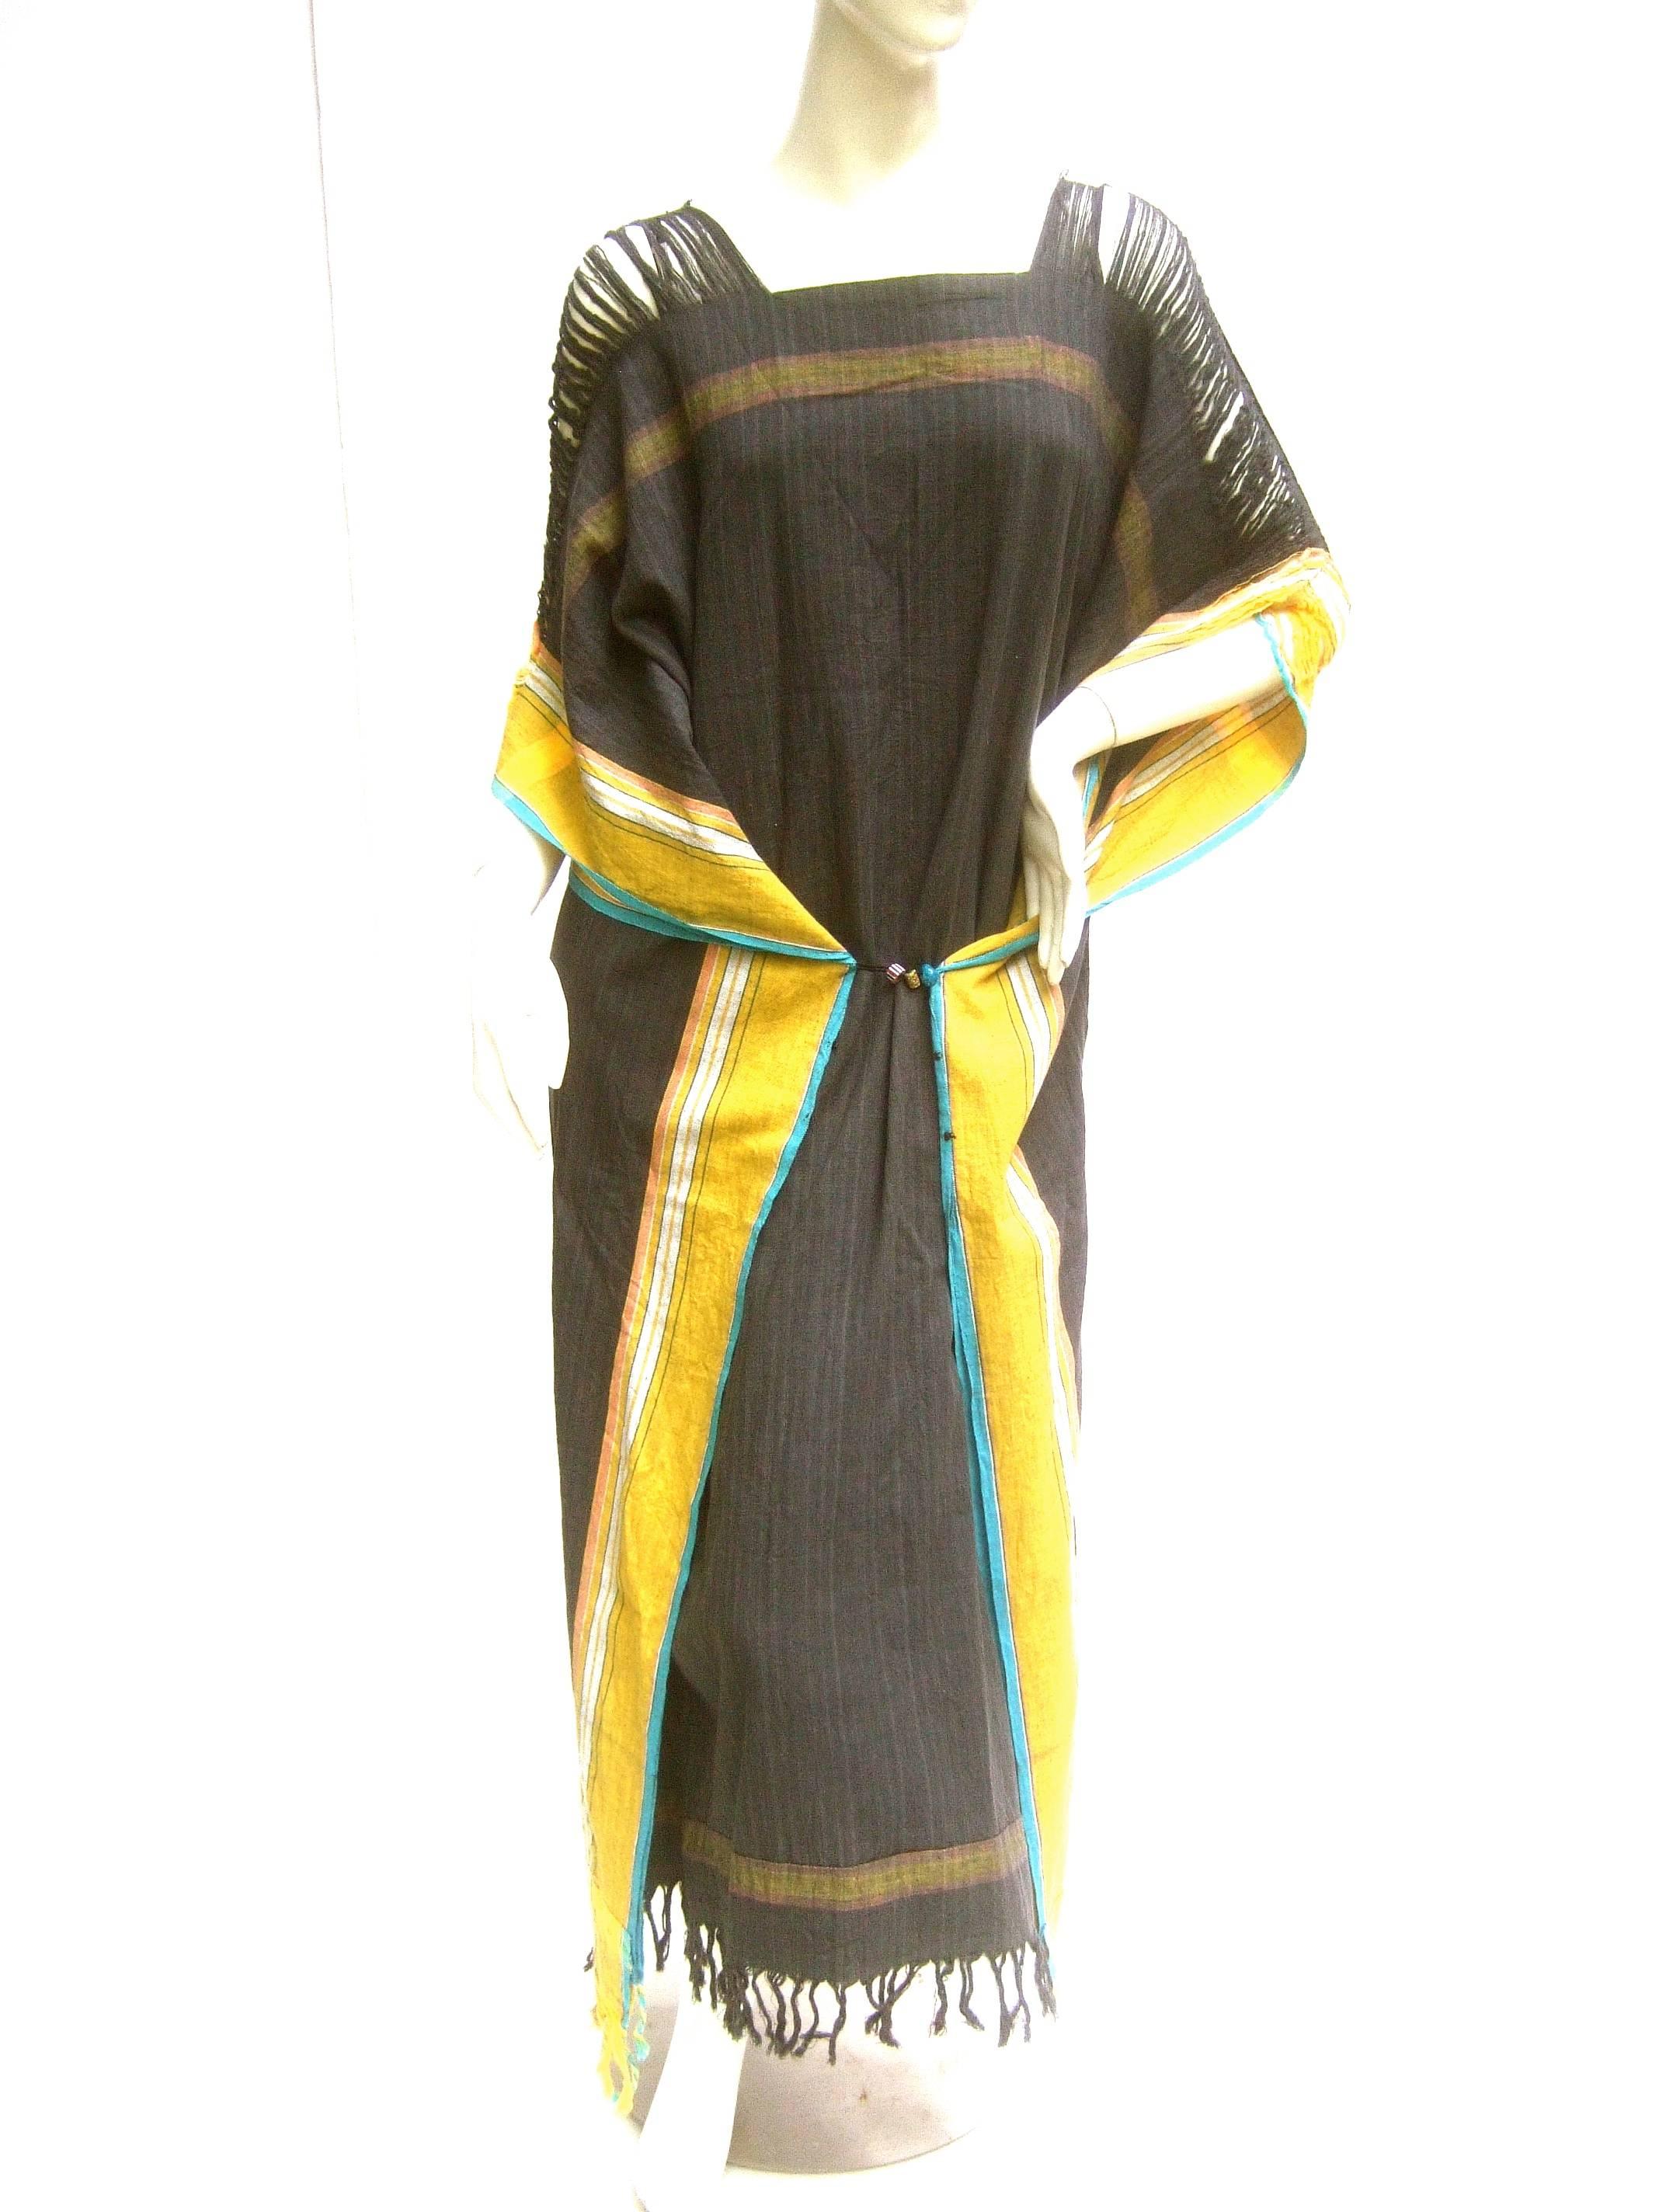 South African 1970s Ethnic Cotton Caftan 1